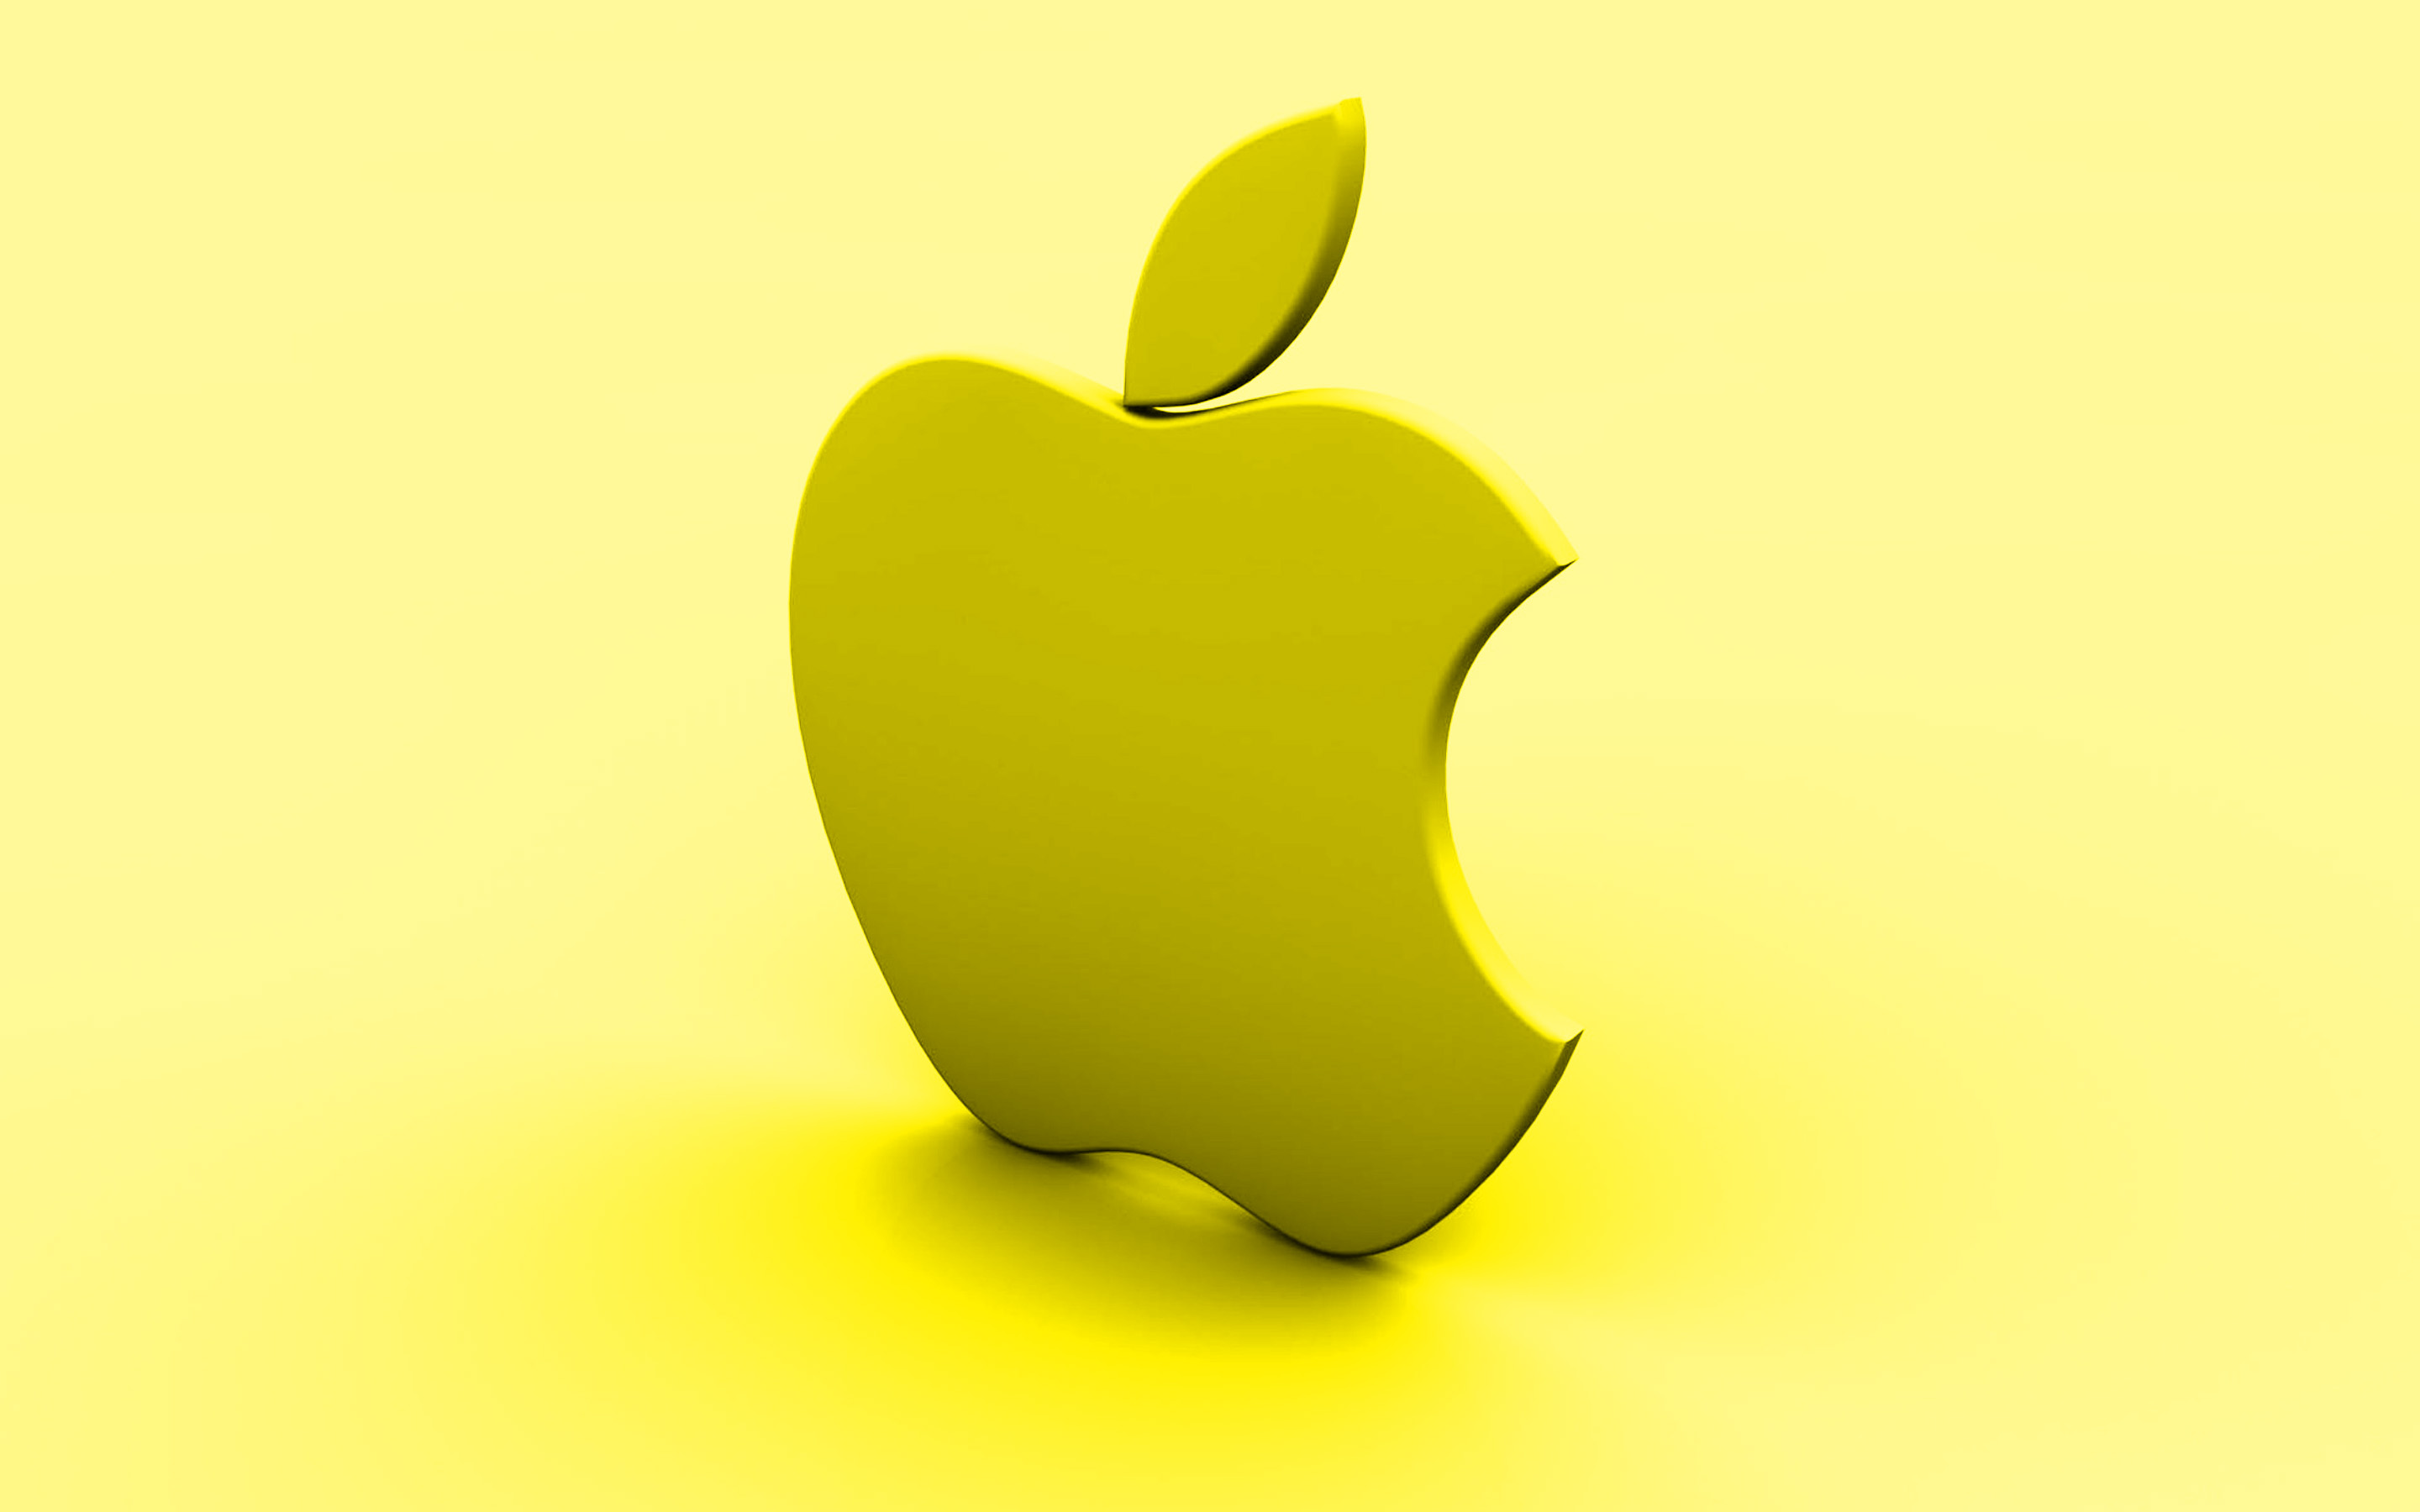 Download wallpaper Apple yellow logo, yellow background, creative, Apple, minimal, Apple logo, artwork, Apple 3D logo for desktop with resolution 2880x1800. High Quality HD picture wallpaper